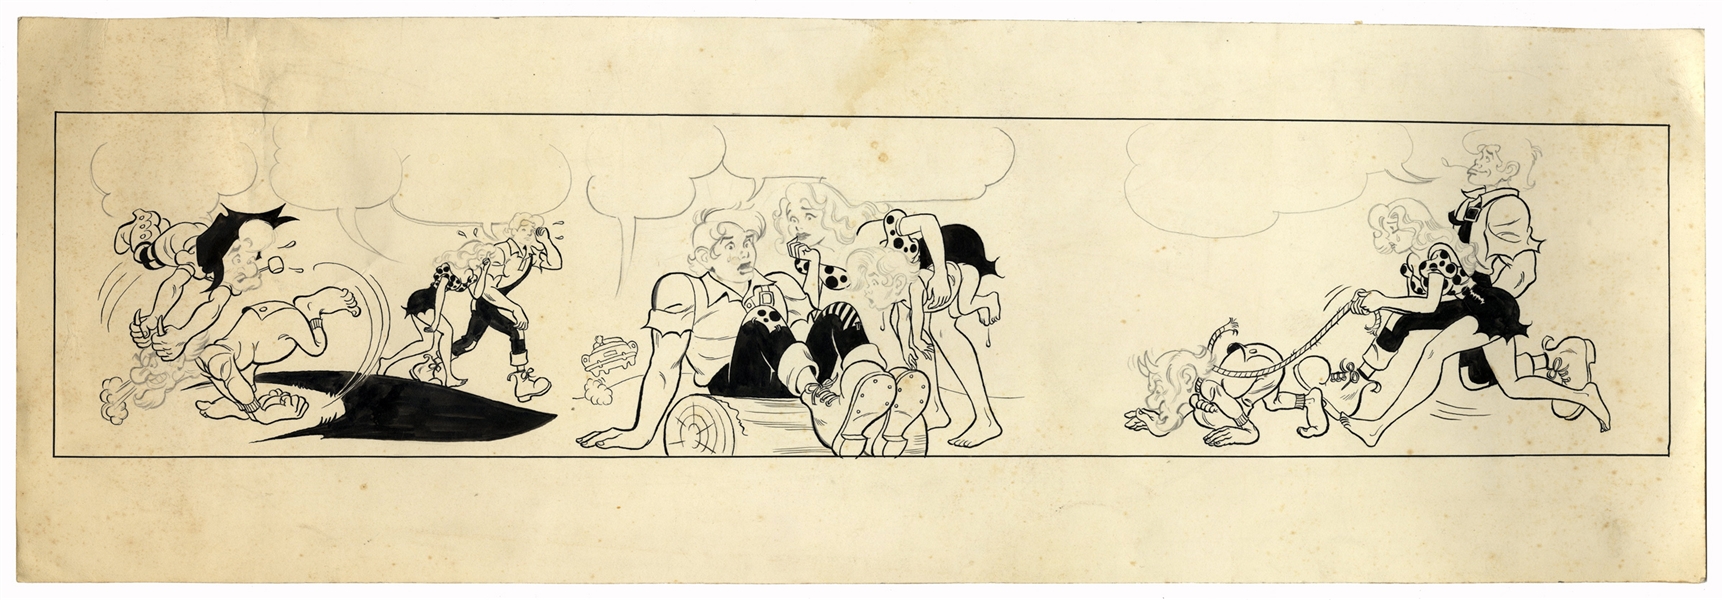 Al Capp ''Li'l Abner'' Unfinished Hand-Drawn Comic Strip -- Featuring The Abner Family -- Measures 27'' x 9'' in Pencil & Ink -- Minor Foxing, Very Good Condition -- From the Al Capp Estate